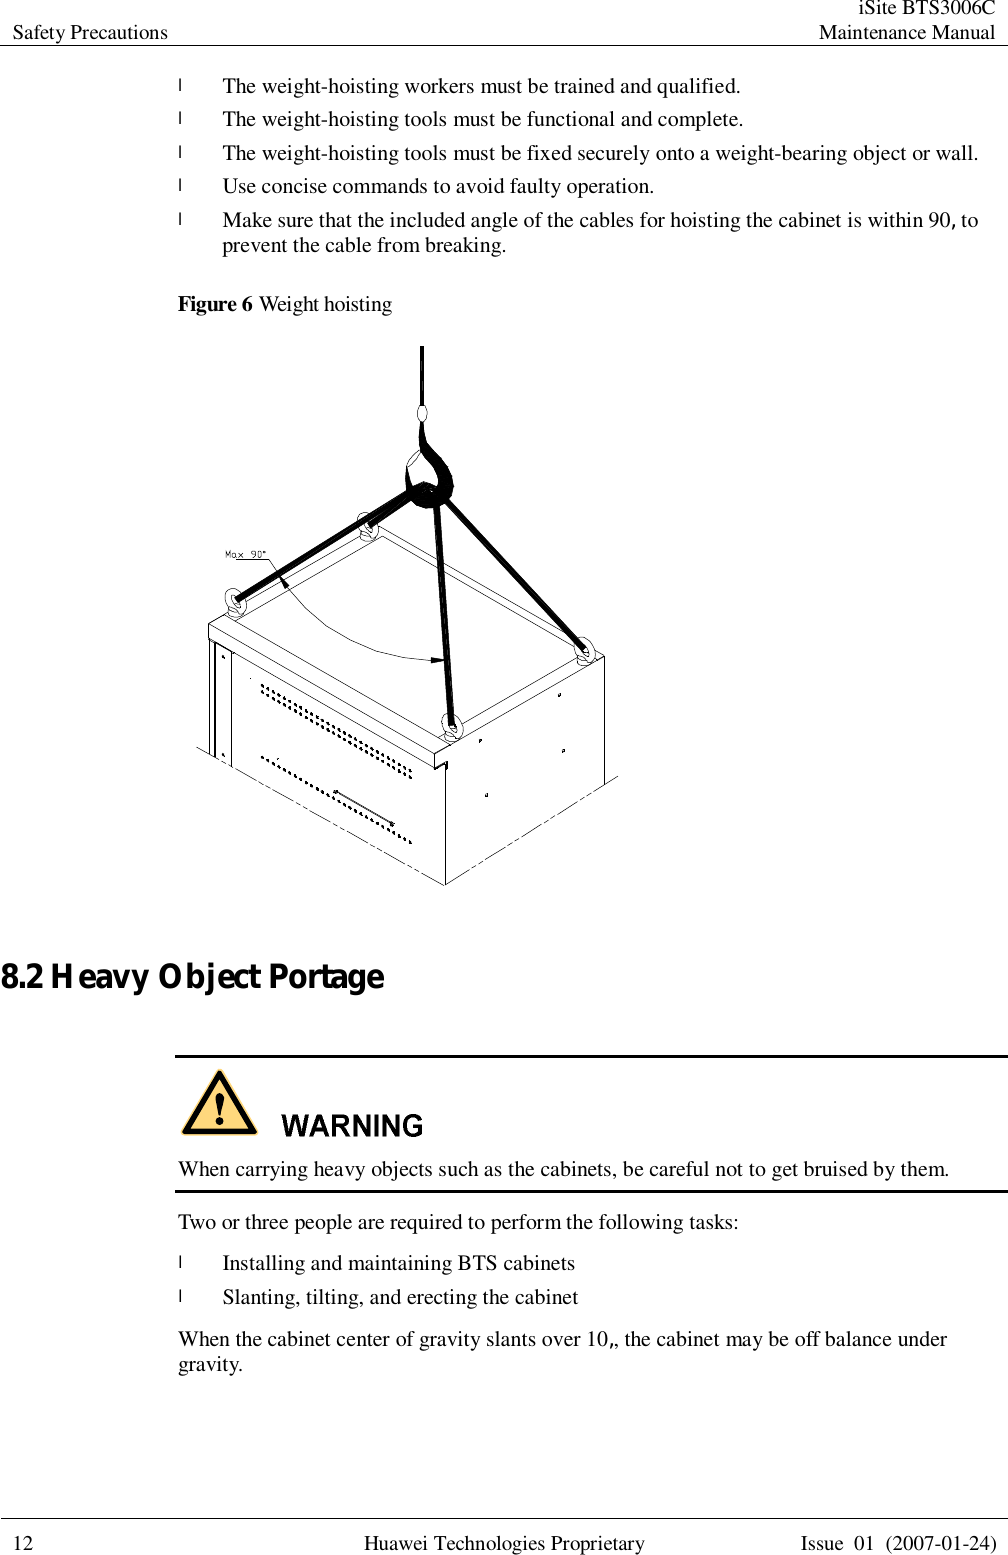 Safety Precautions  iSite BTS3006C Maintenance Manual  12 Huawei Technologies Proprietary Issue 01 (2007-01-24)  l The weight-hoisting workers must be trained and qualified. l The weight-hoisting tools must be functional and complete. l The weight-hoisting tools must be fixed securely onto a weight-bearing object or wall.  l Use concise commands to avoid faulty operation. l Make sure that the included angle of the cables for hoisting the cabinet is within 90â to prevent the cable from breaking. Figure 6 Weight hoisting   8.2 Heavy Object Portage   When carrying heavy objects such as the cabinets, be careful not to get bruised by them. Two or three people are required to perform the following tasks: l Installing and maintaining BTS cabinets l Slanting, tilting, and erecting the cabinet When the cabinet center of gravity slants over 10â, the cabinet may be off balance under gravity. 